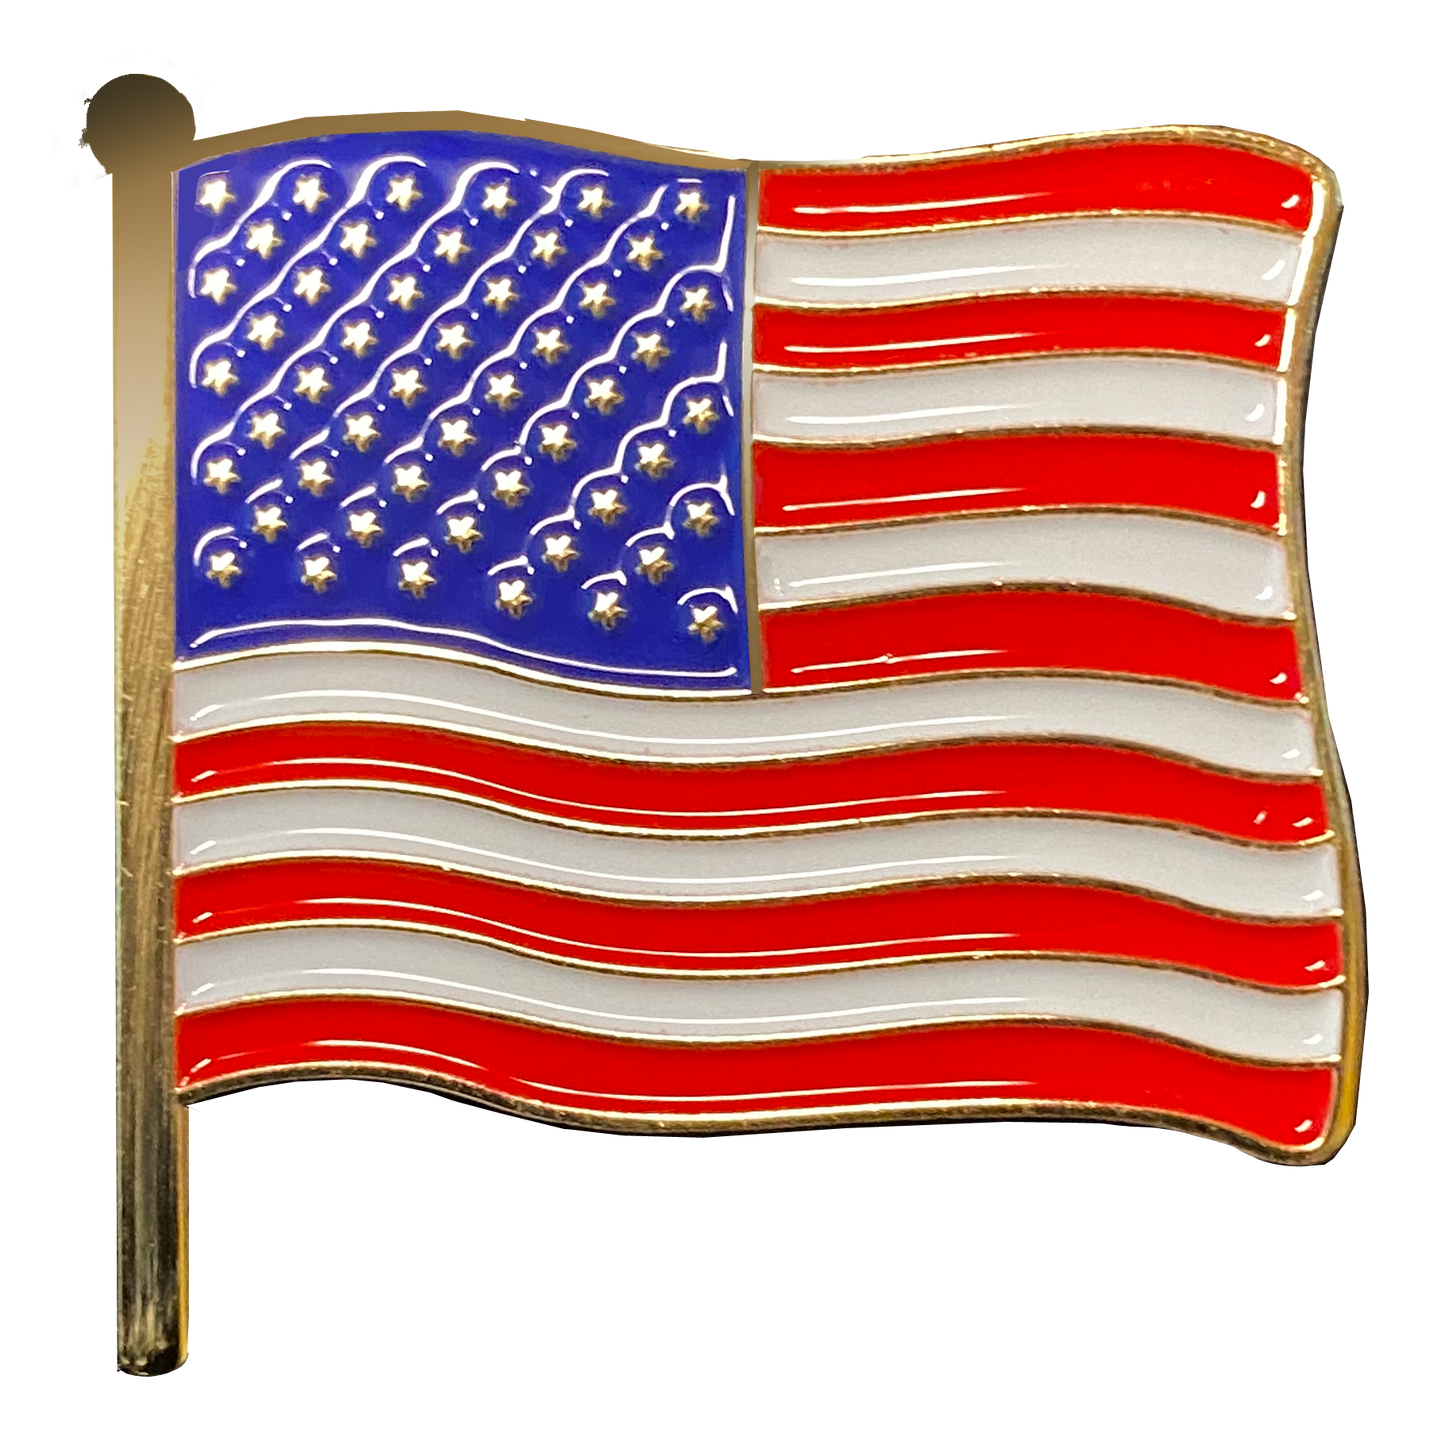 CL6-14 American Waving Flag Lapel Pin 1.25" with 2 pin posts and deluxe clasps, U.S. Stars are Stripes, Old Glory US USA Presidential